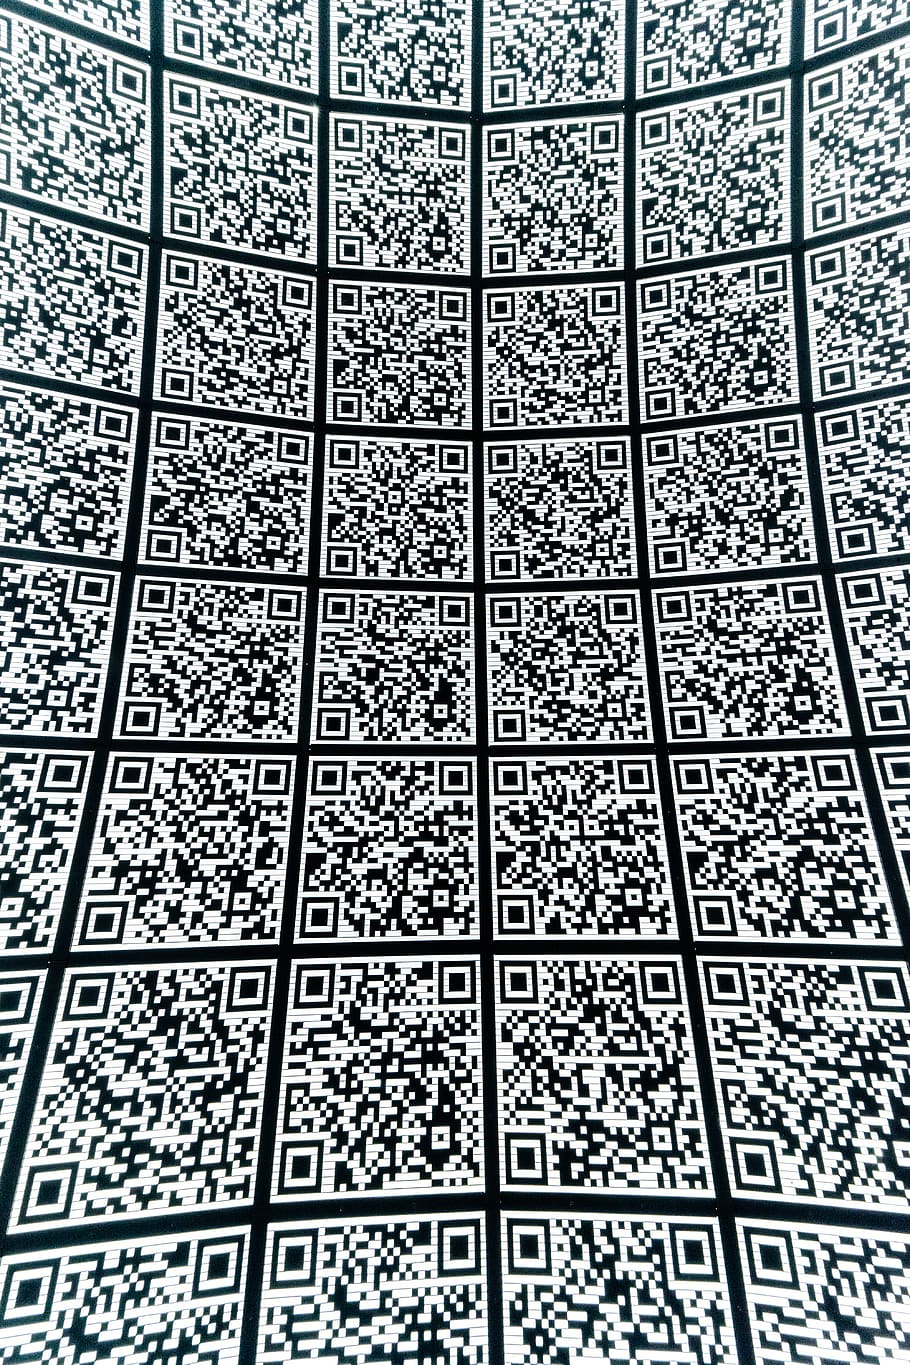 QR code, backgrounds, pattern, full frame, no people, indoors